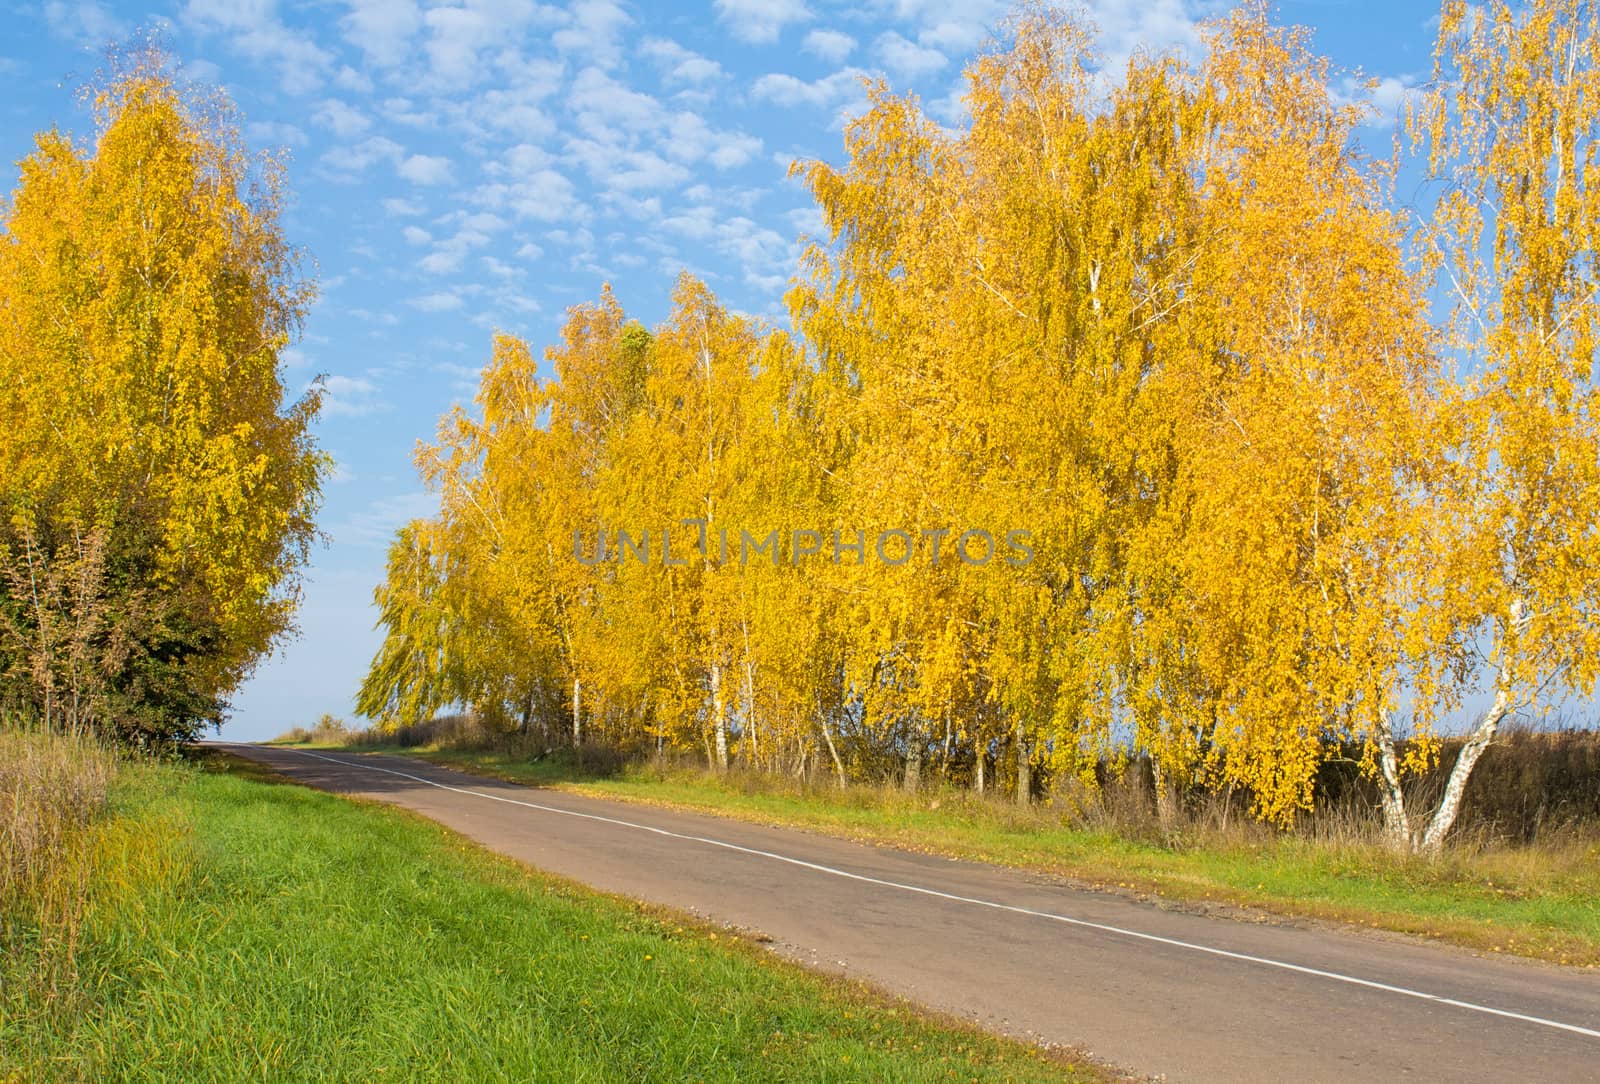 Autumn landscape: country road and trees with abundant yellow leaves on a clear Sunny day.